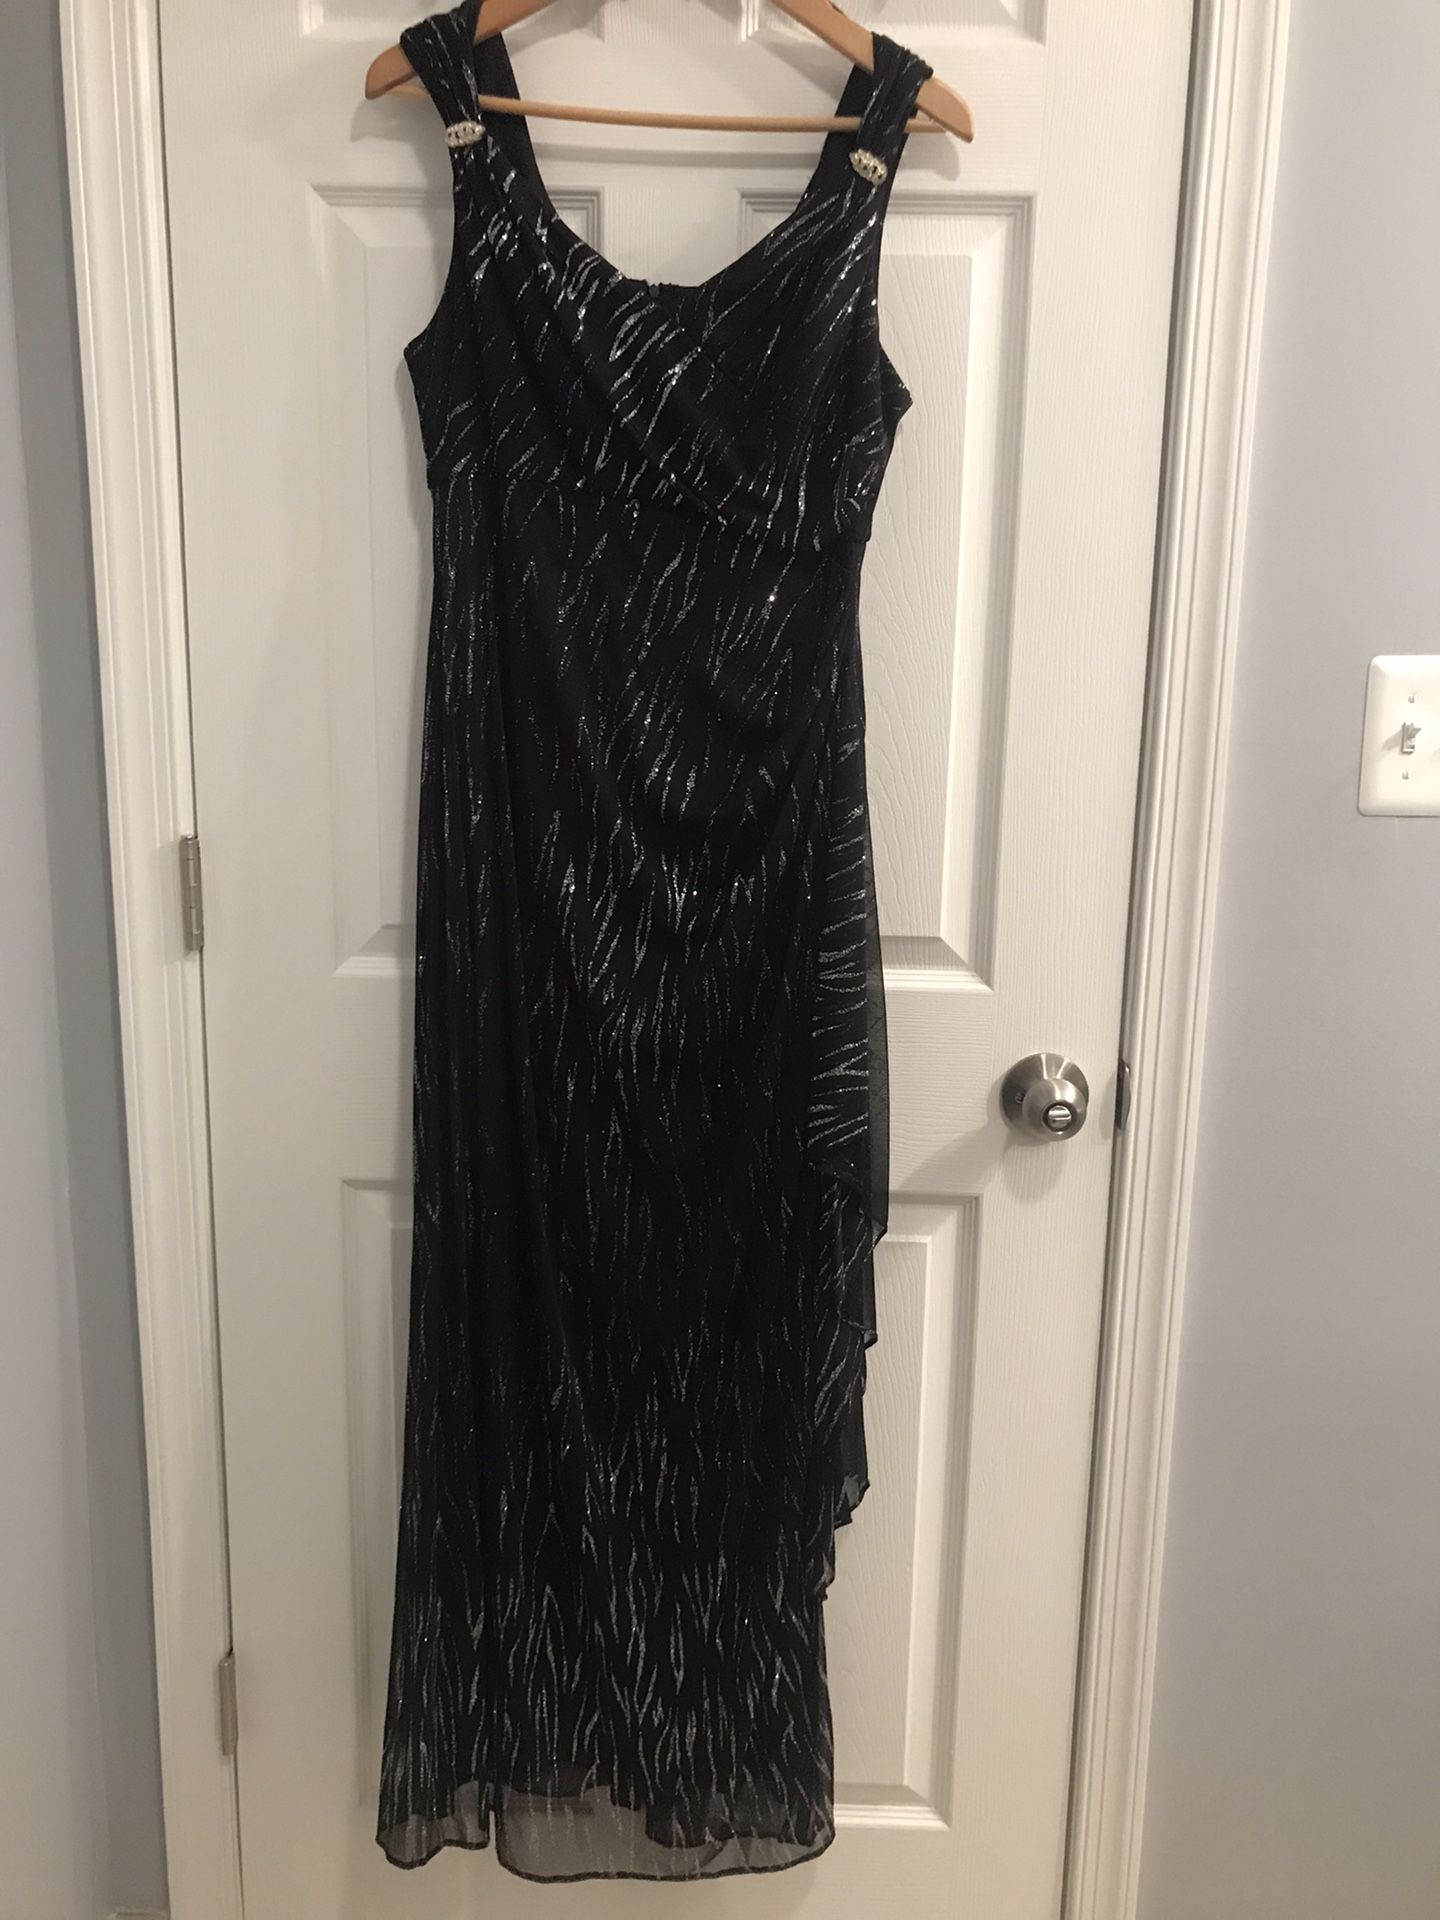  Stunning Black Sequin Dress 👗 (Size14) By R&M Richards